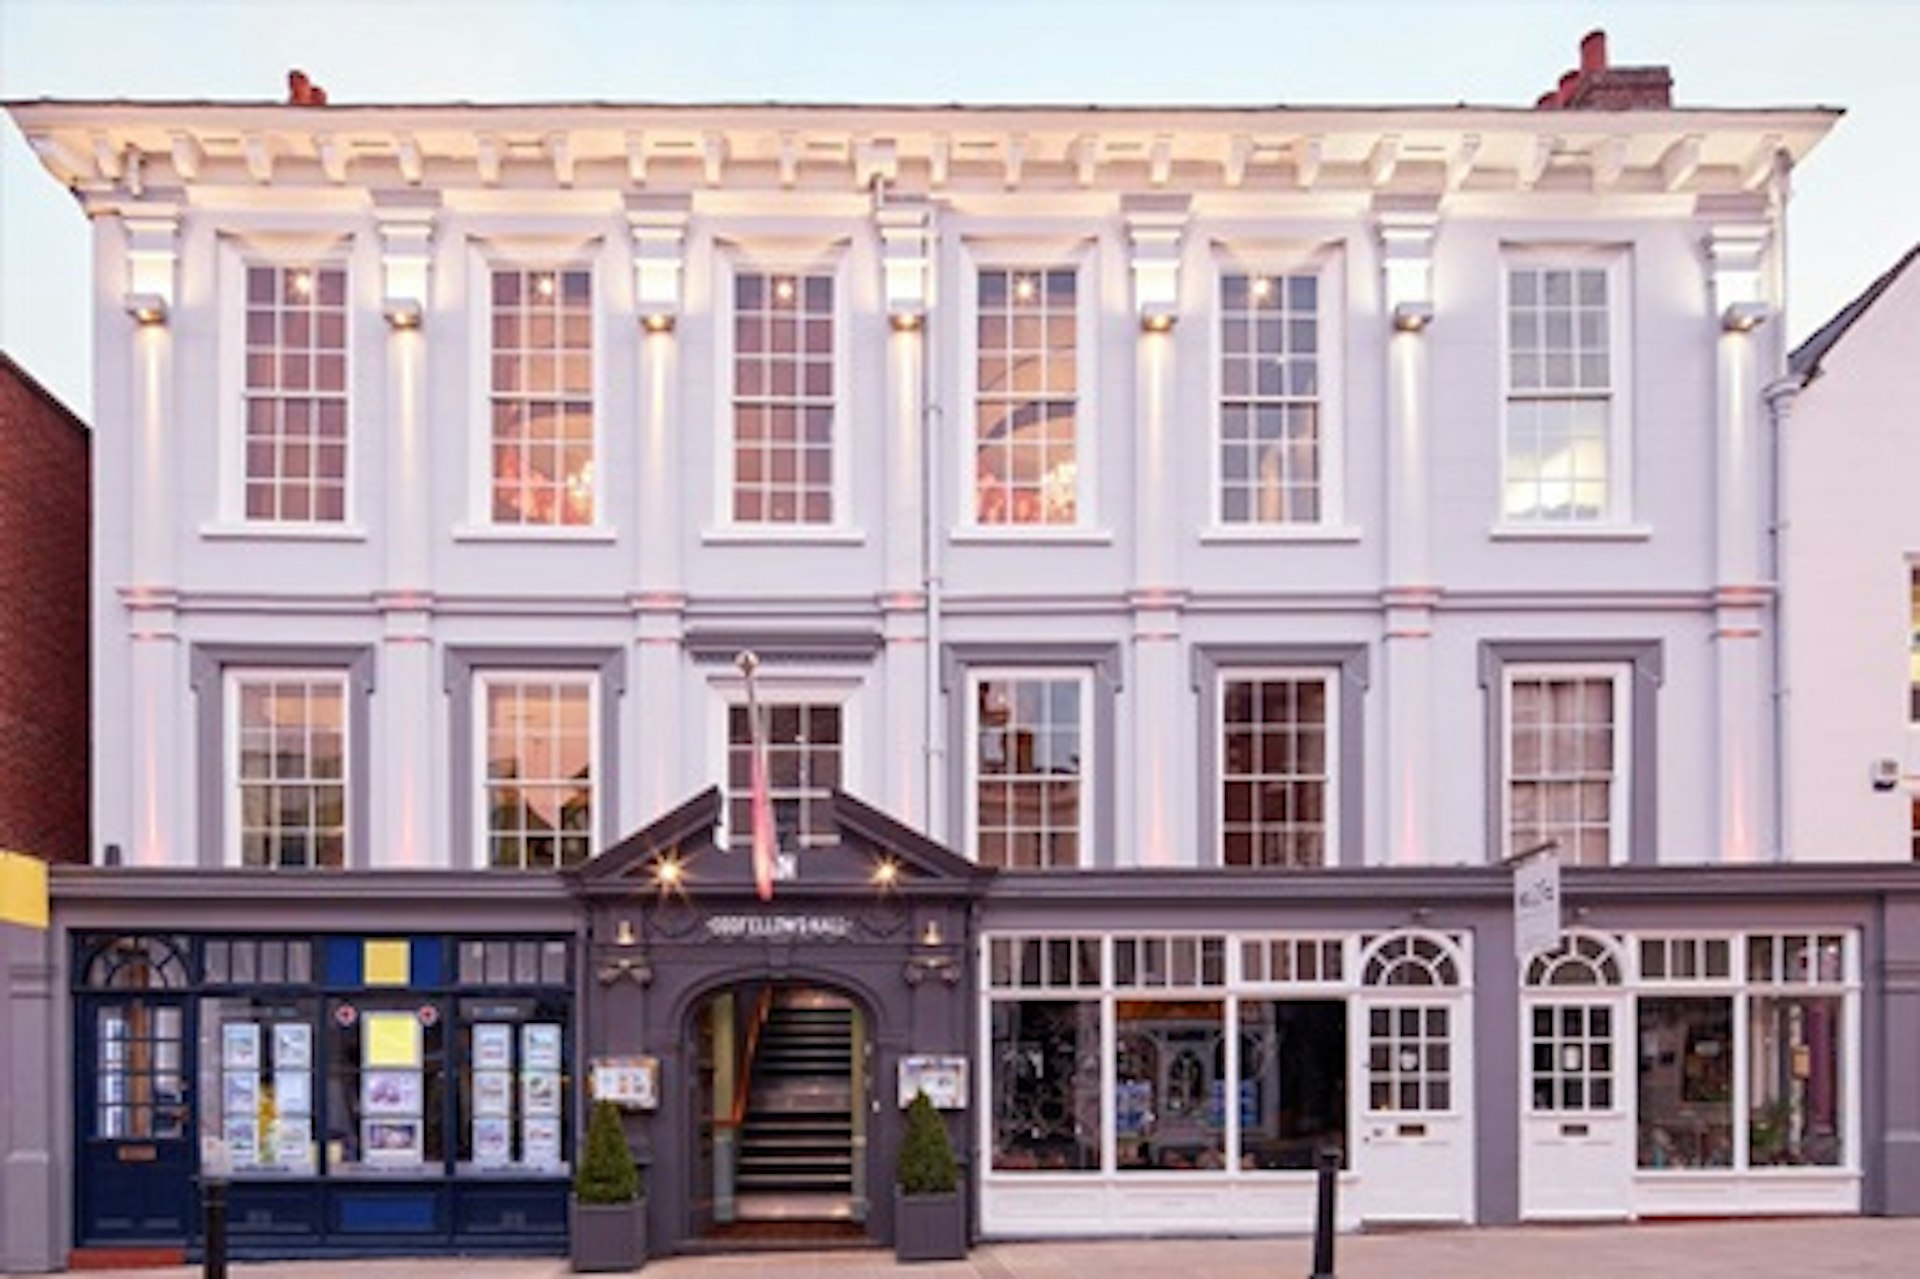 One Night 4* City Break for Two at Oddfellows Chester 3